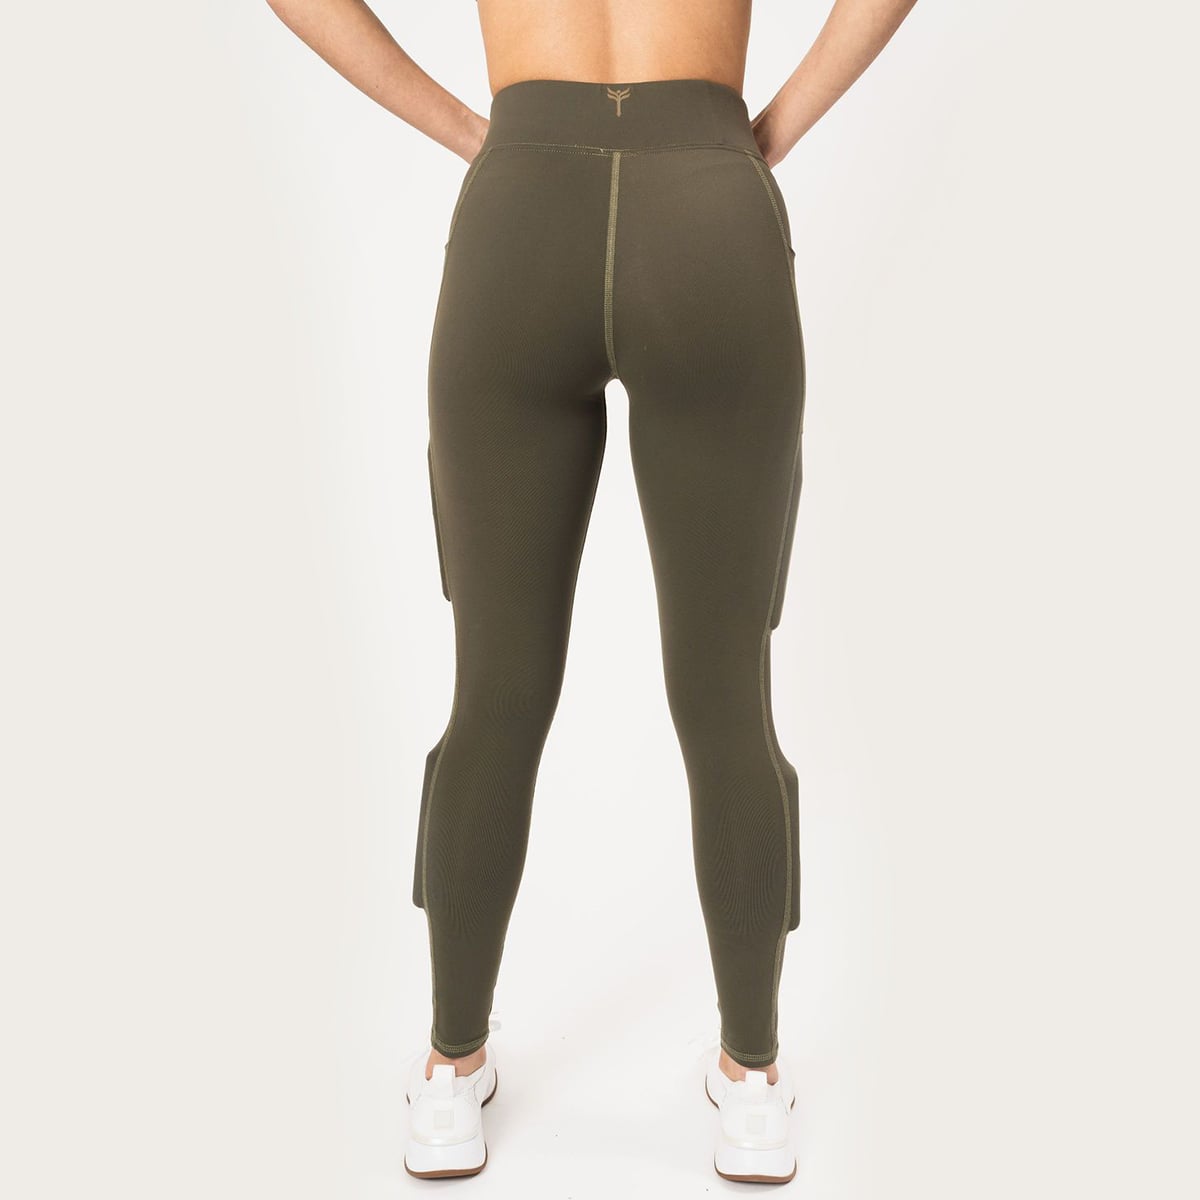 rear view, in the the army green legging called juniper lift, hands down on hips, with white stitch that runs down the leg, weight in the weight pocket above the knee and weight in the below the knee on the side calf.